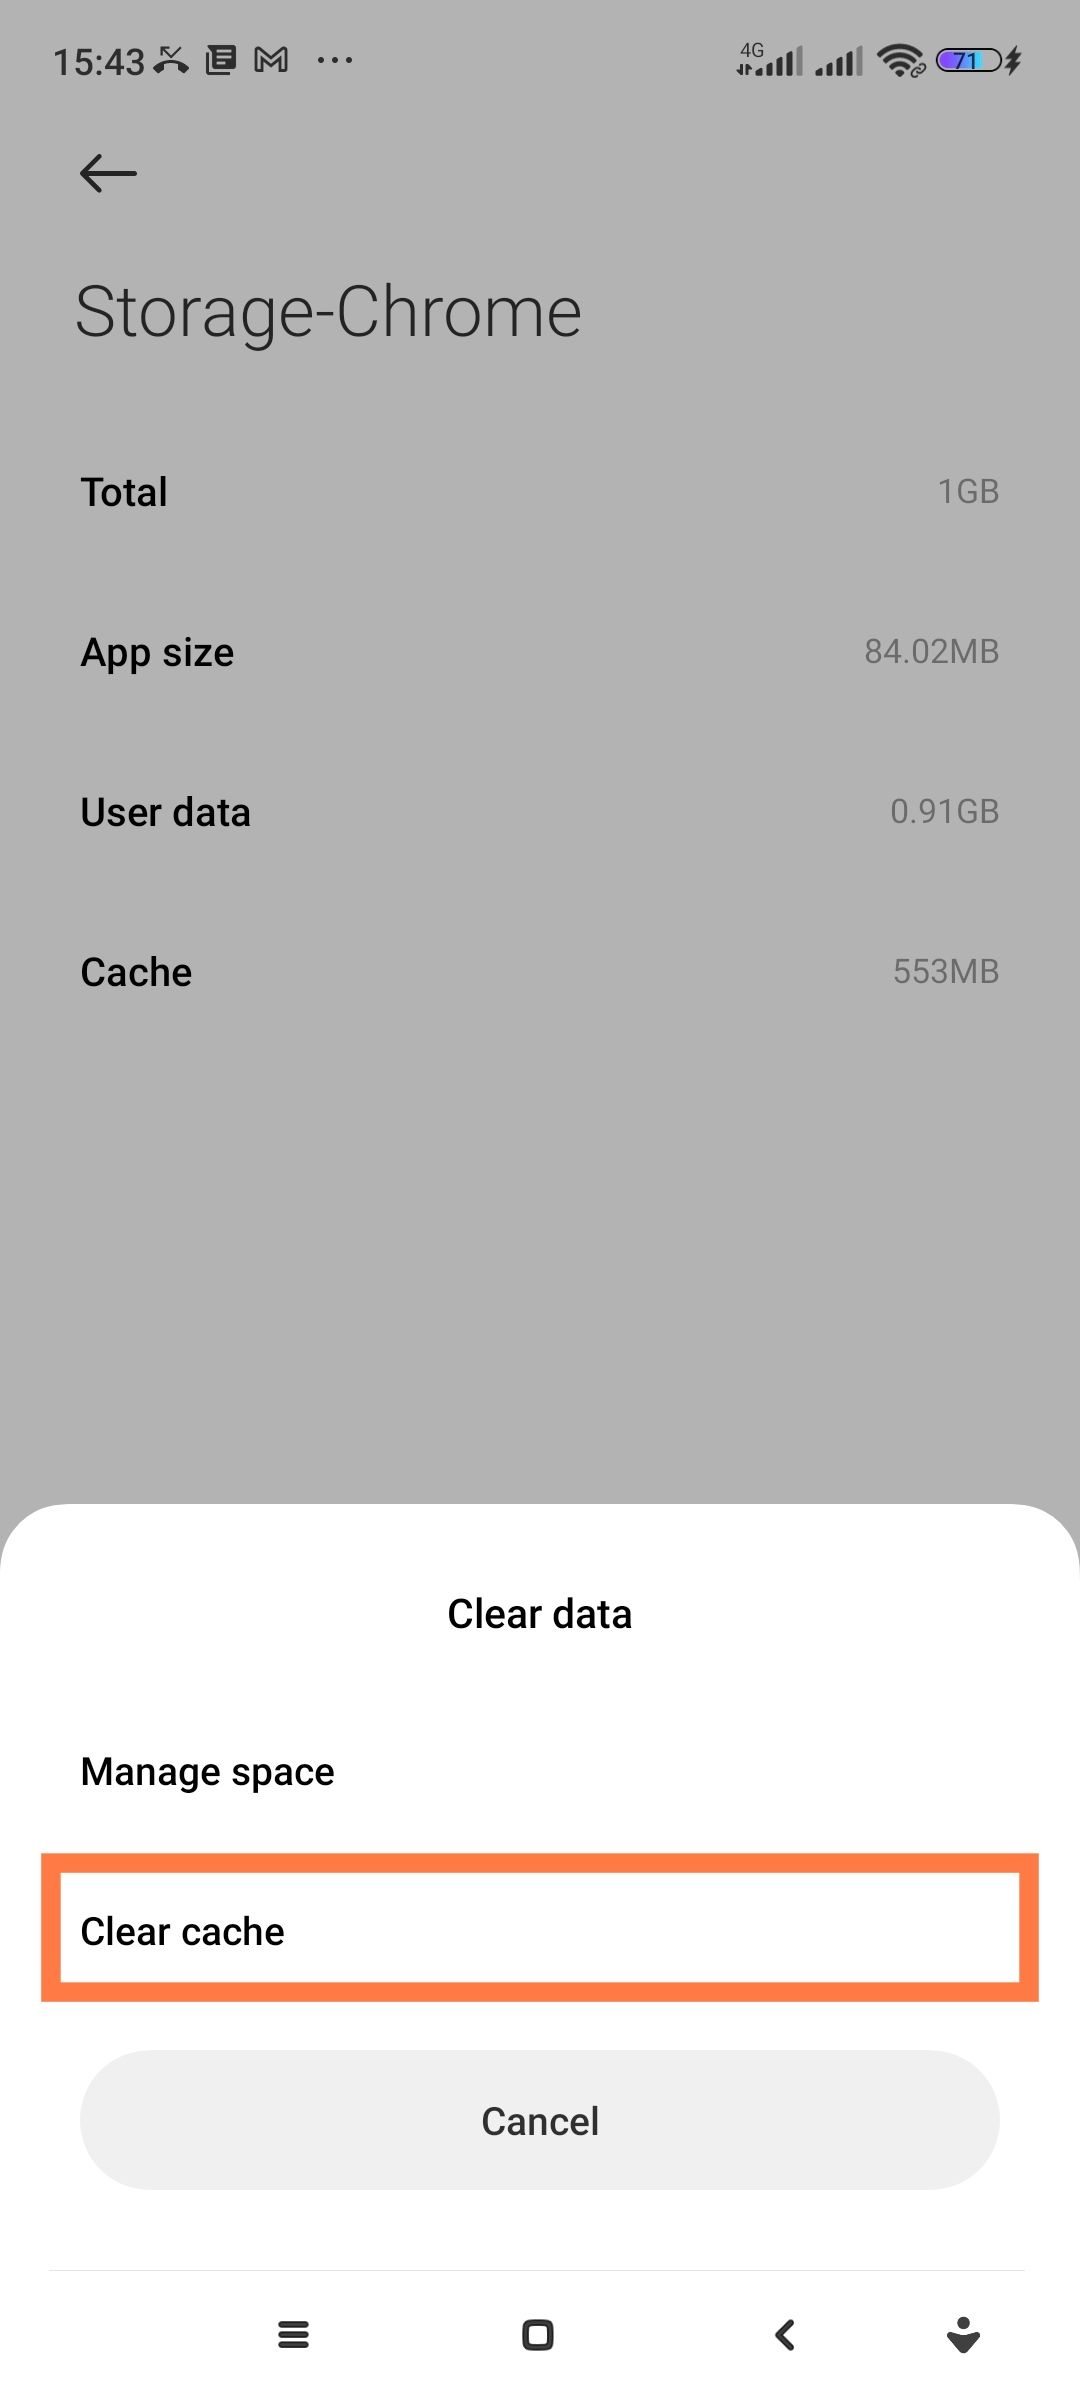 Clear the cache on your Android device